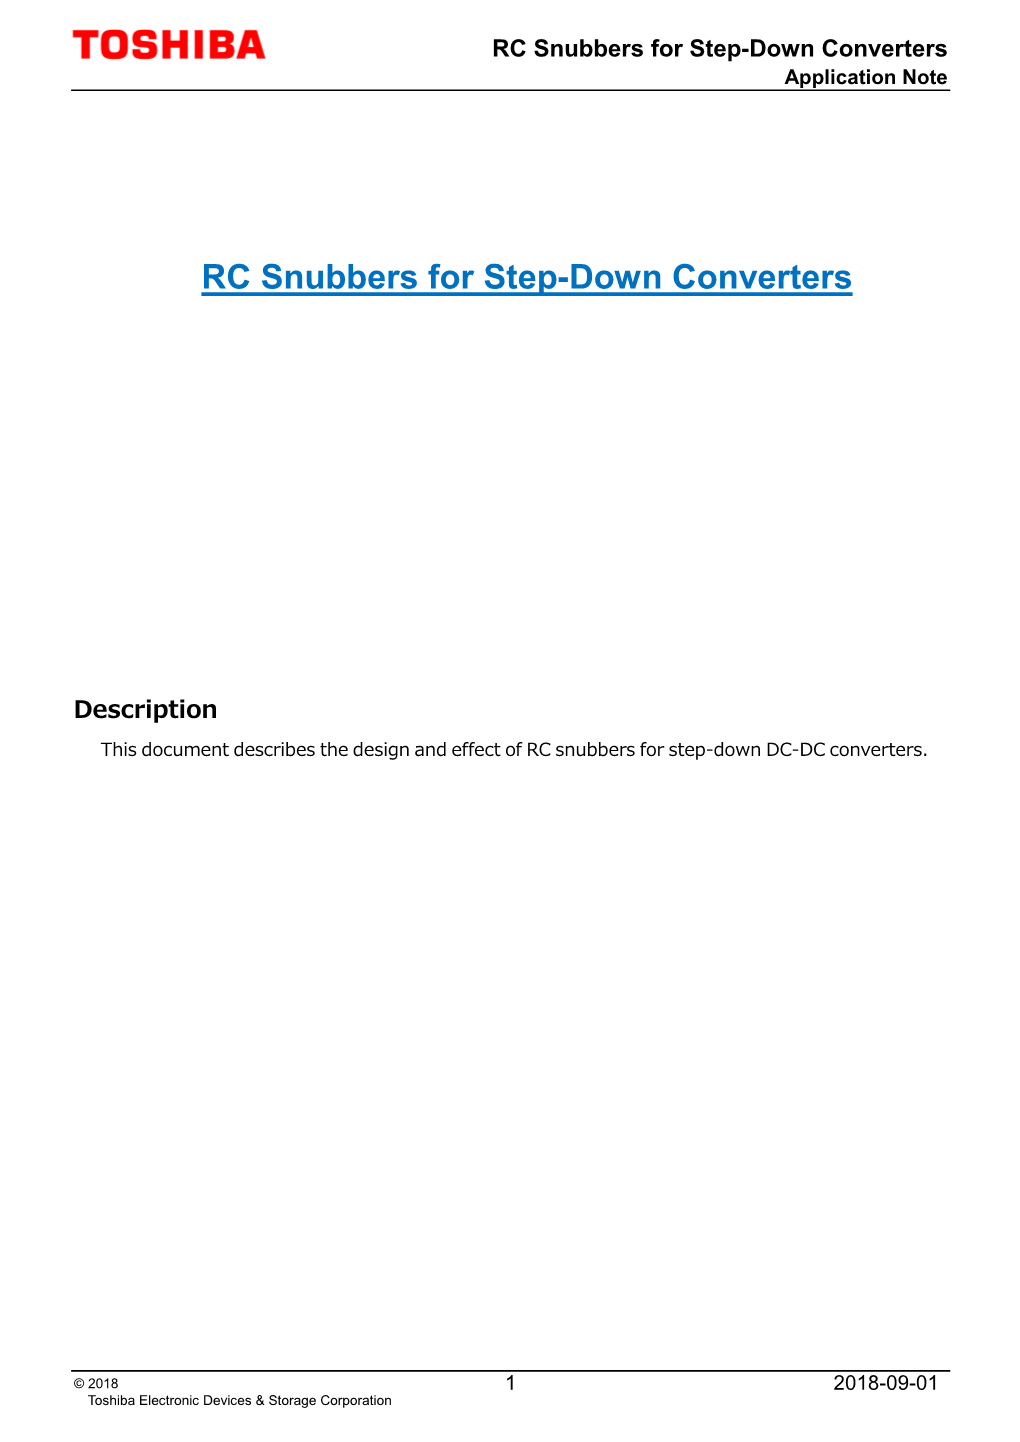 RC Snubbers for Step-Down Converters Application Note